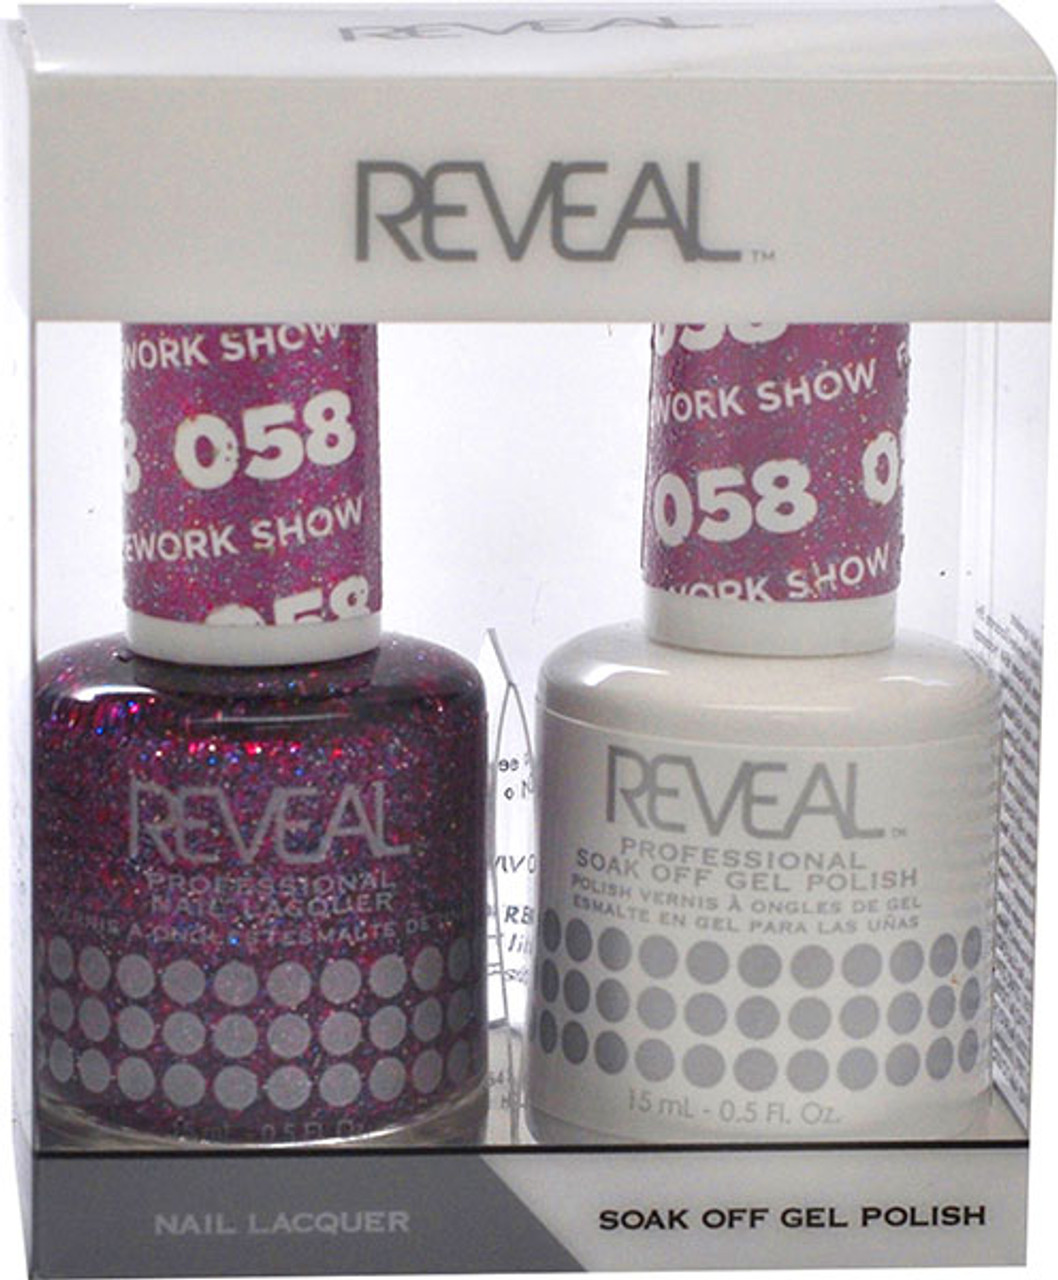 Reveal Gel Polish & Nail Lacquer Matching Duo - FIREWORK SHOW - .5 oz